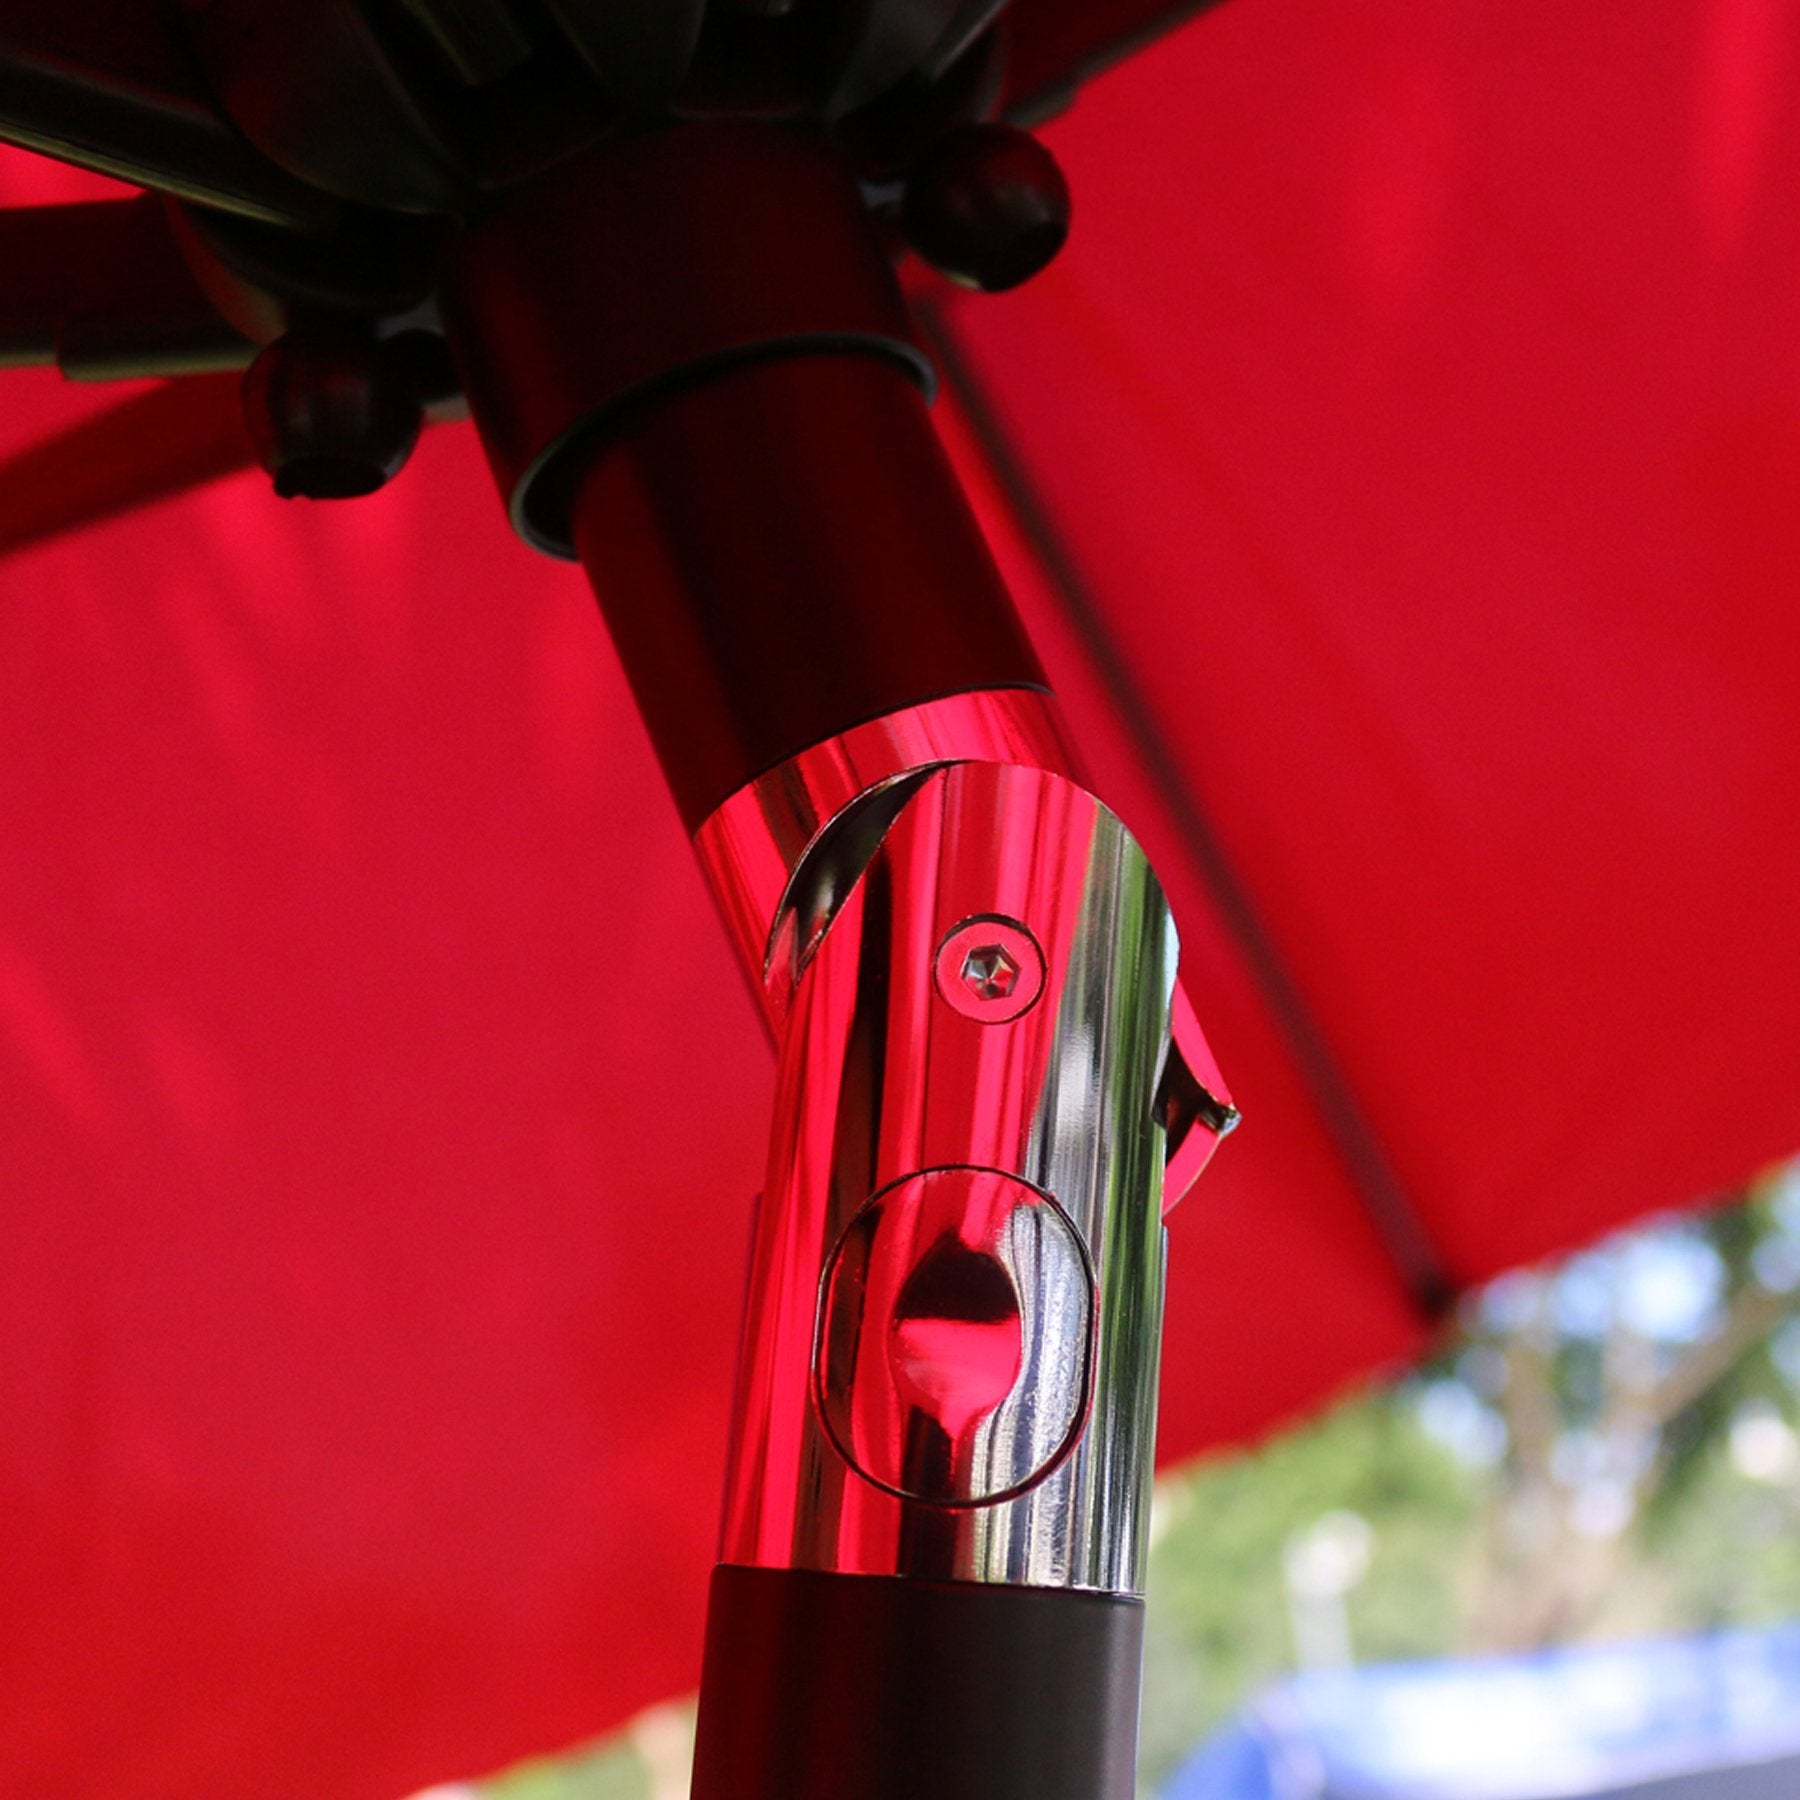 Sunnyglade 9 Patio Umbrella Outdoor Table Umbrella with 8 Sturdy Ribs (Red)